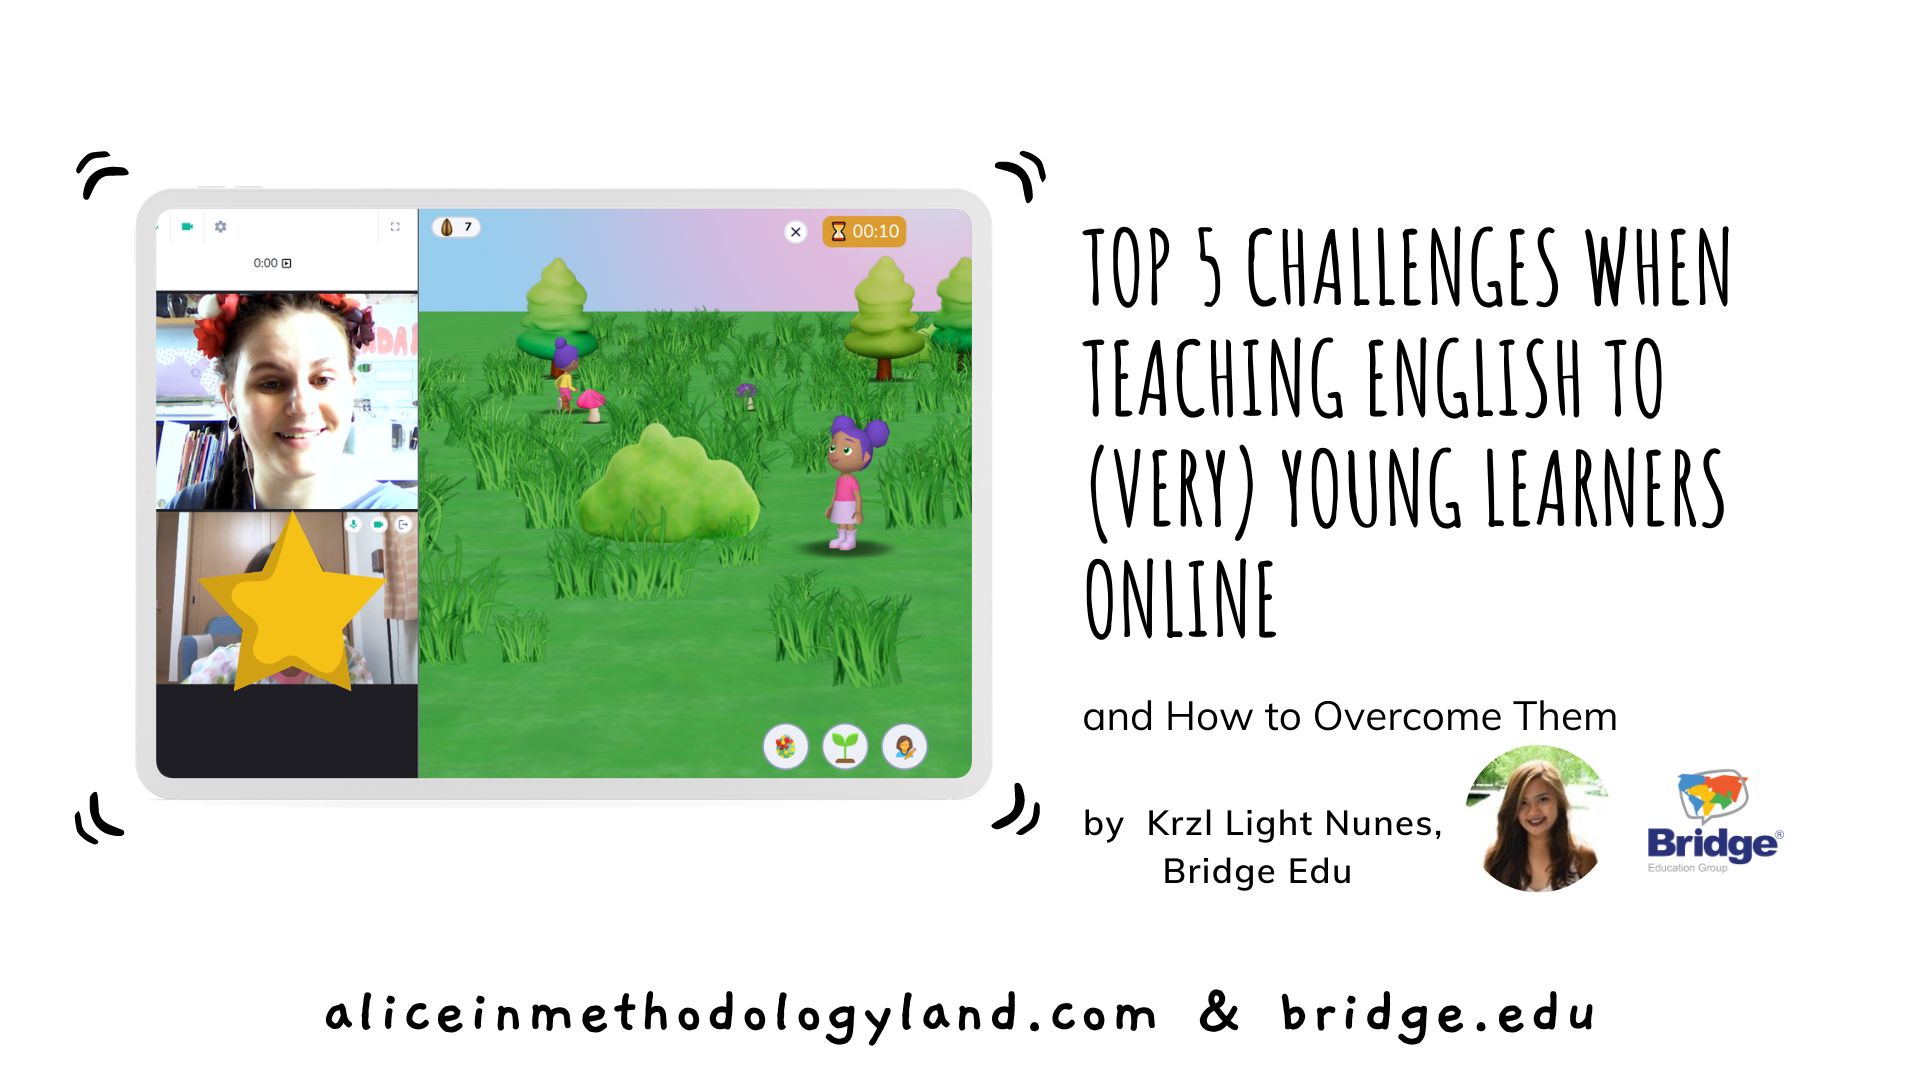 Top 5 Challenges When Teaching English to (Very) Young Learners Online and How to Overcome Them